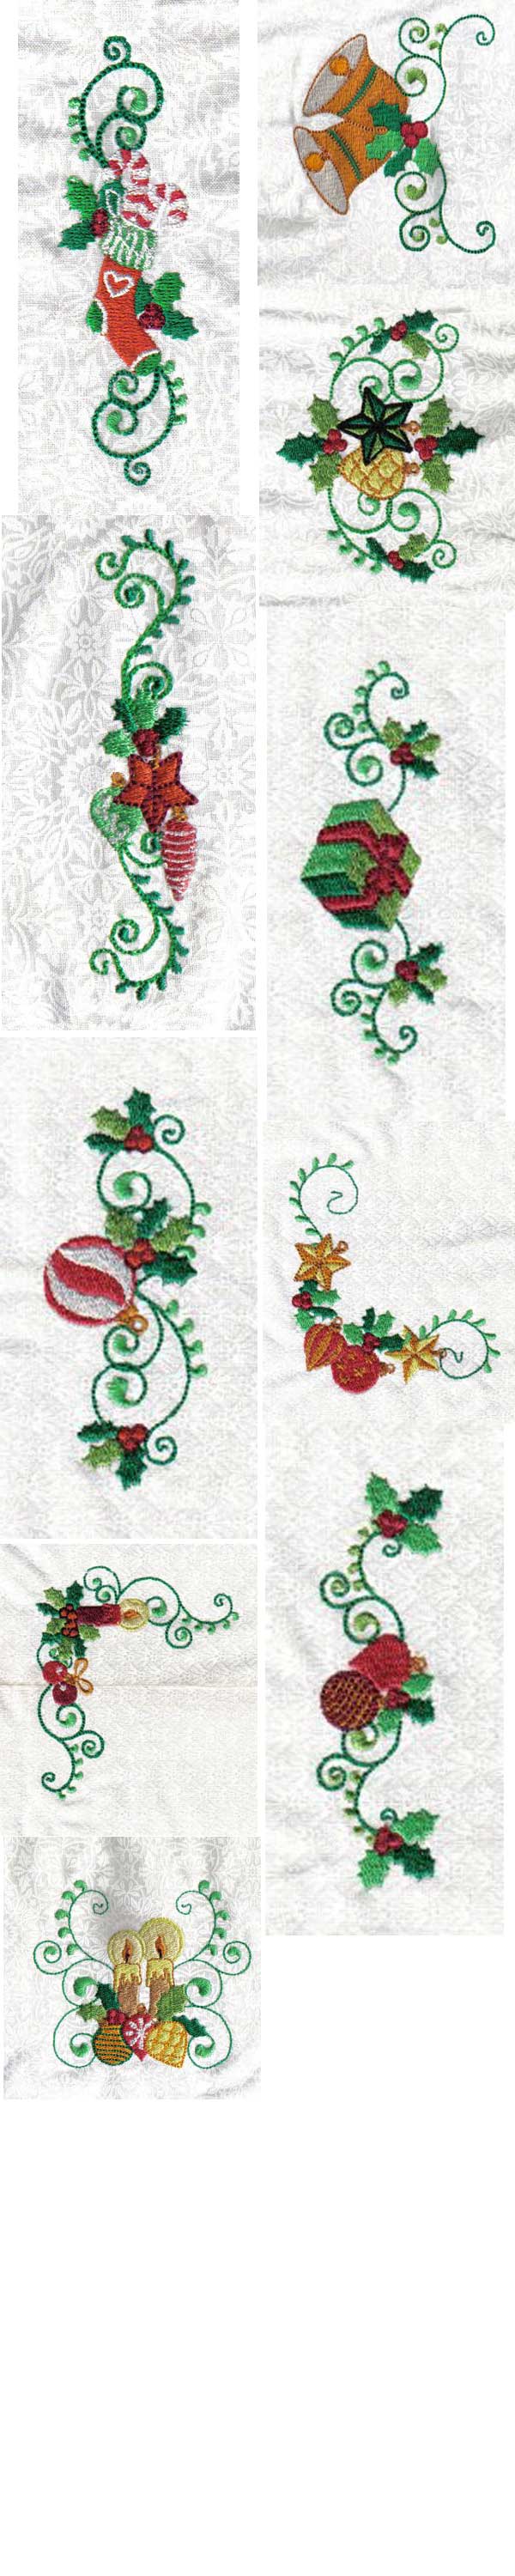 Christmas Ornaments Embroidery Machine Design Details